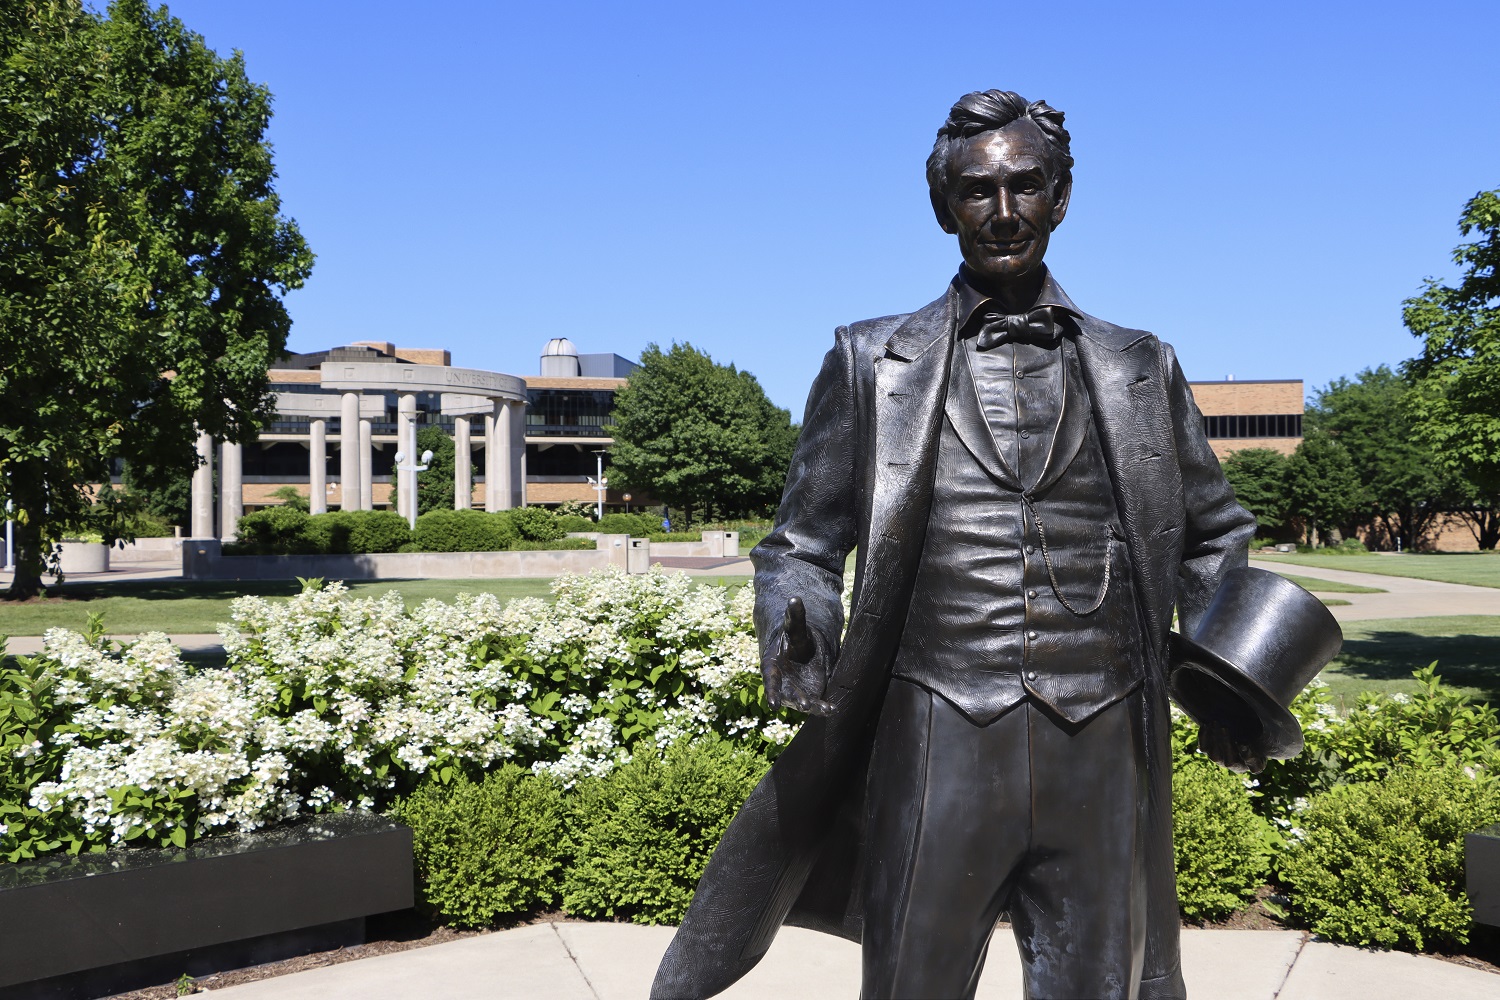 Photo of the UIS Young Lincoln Statue surrounded by flowering bushes with the UIS Colonnade in the background, taken by Blake Woods on July 1st, 2022.